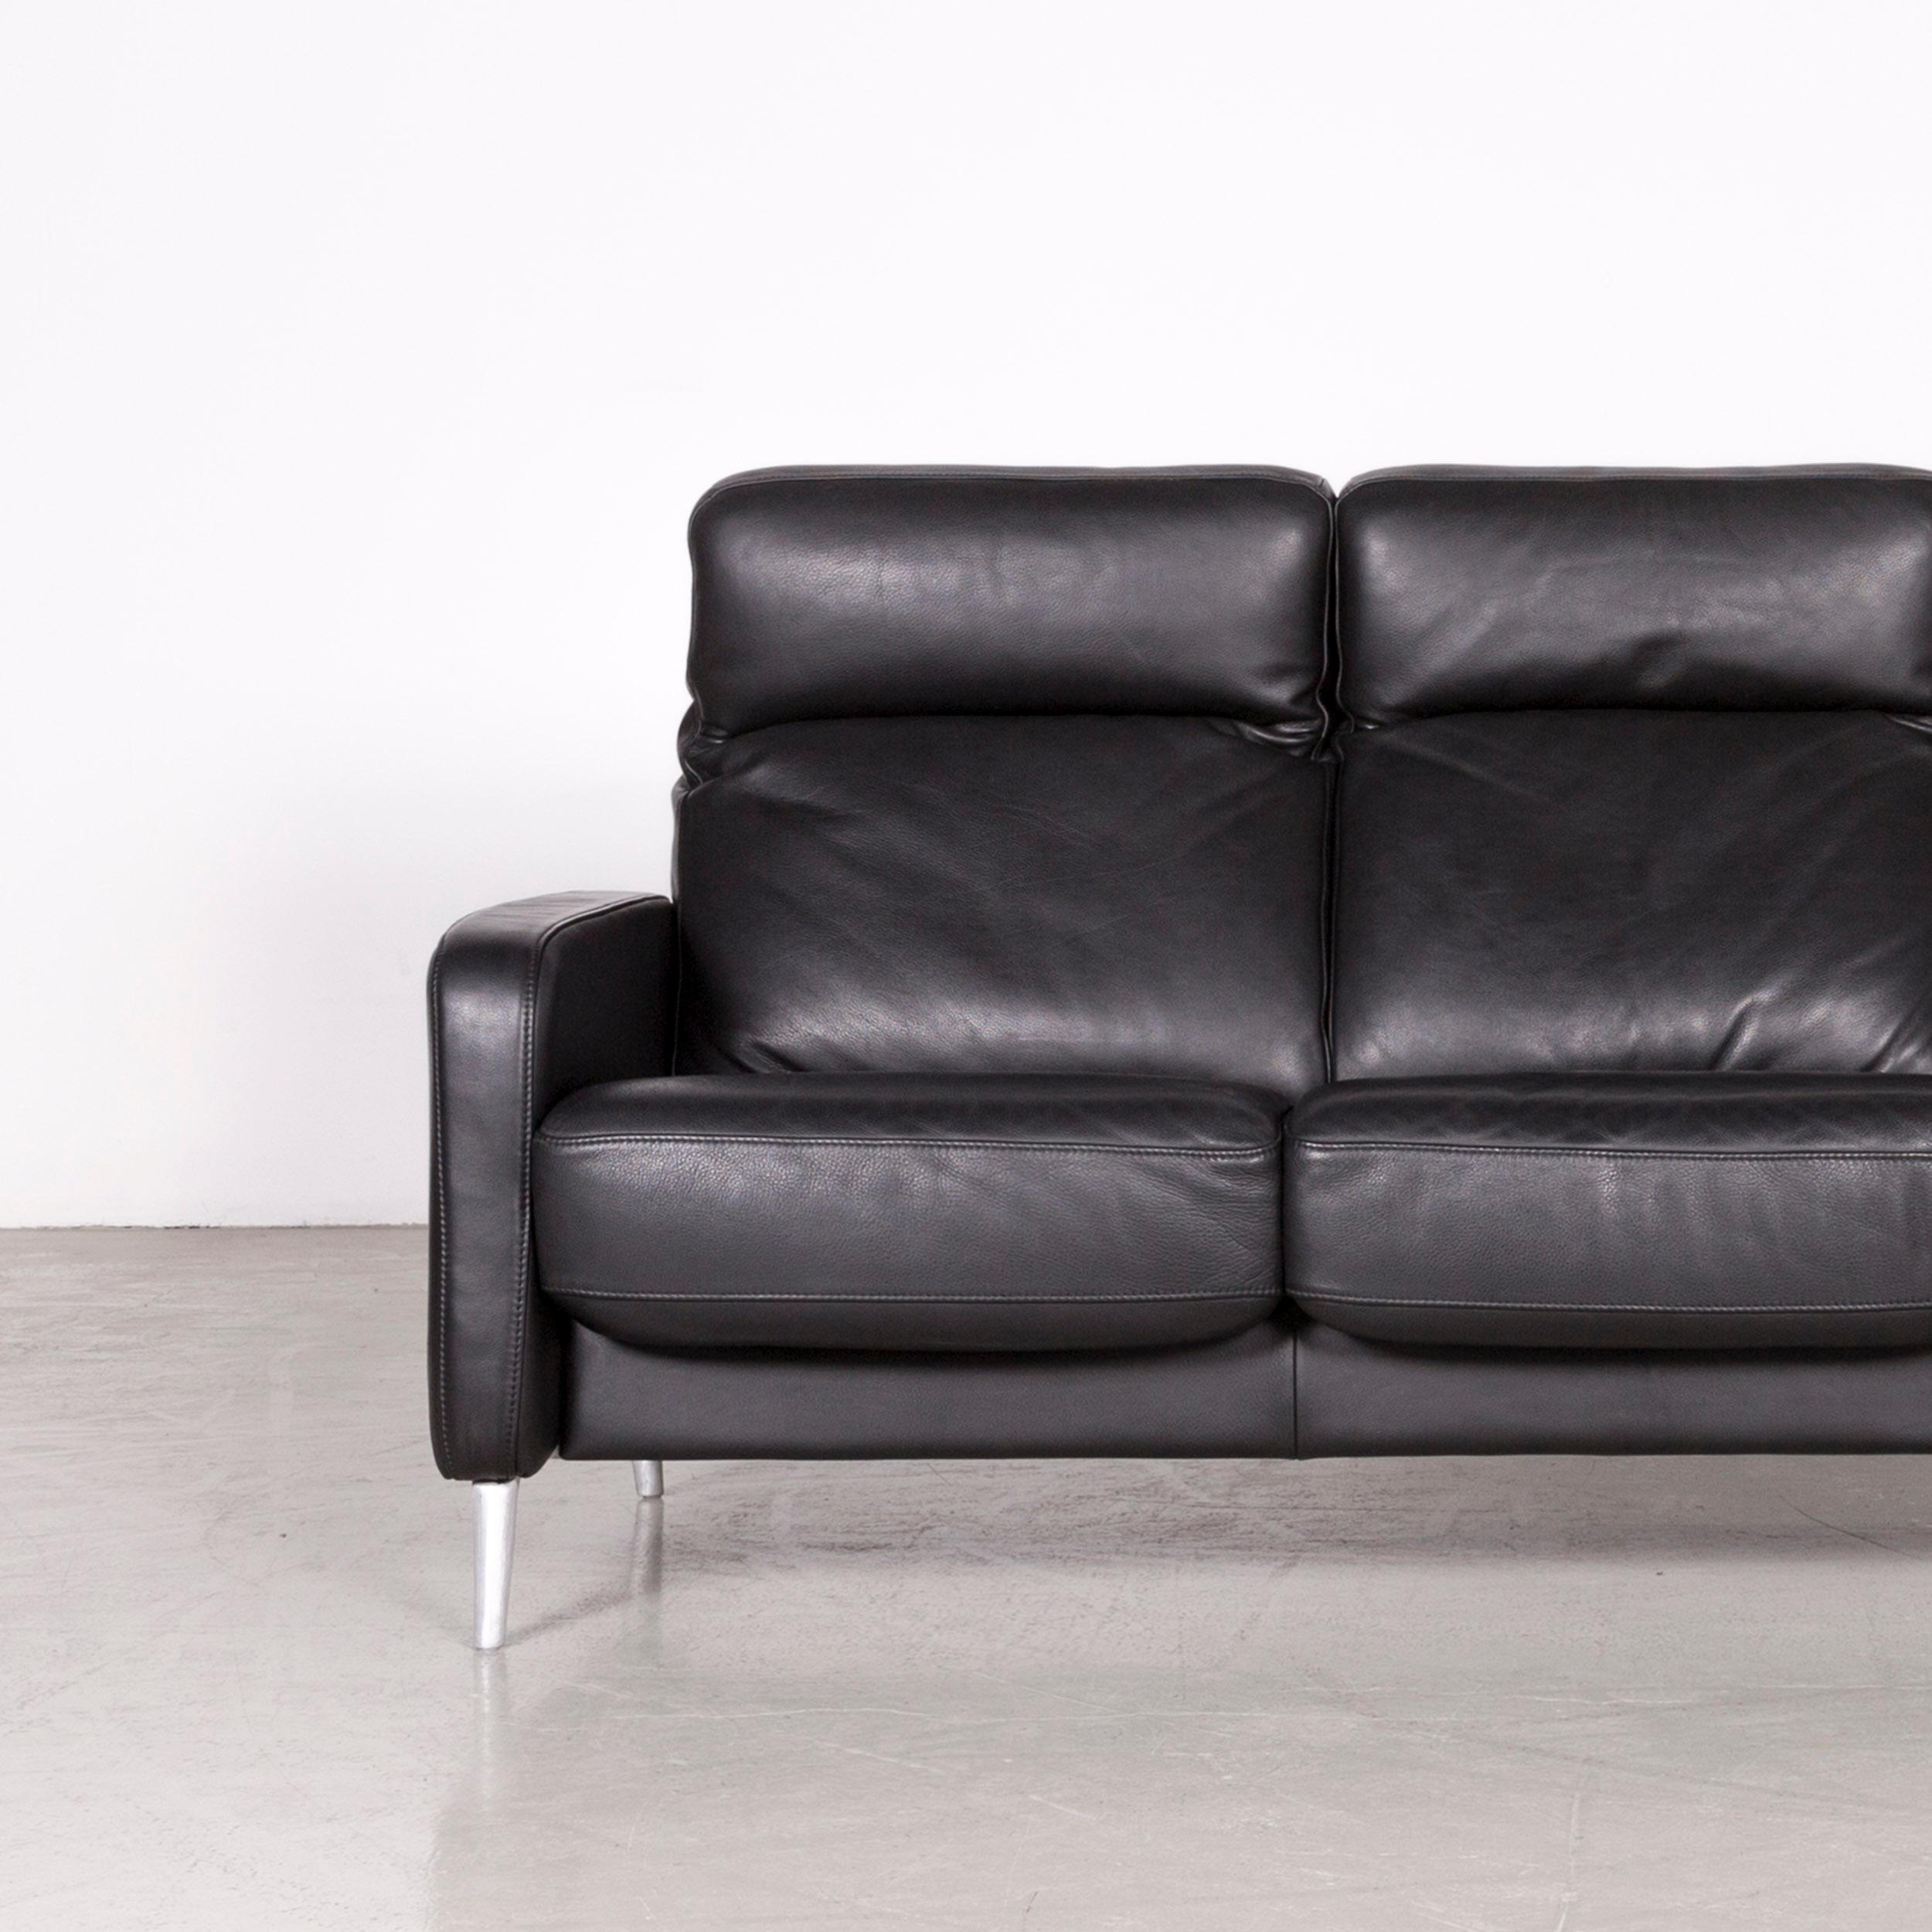 Musterring Designer Leather Sofa Black Three-Seat Couch In Good Condition For Sale In Cologne, DE